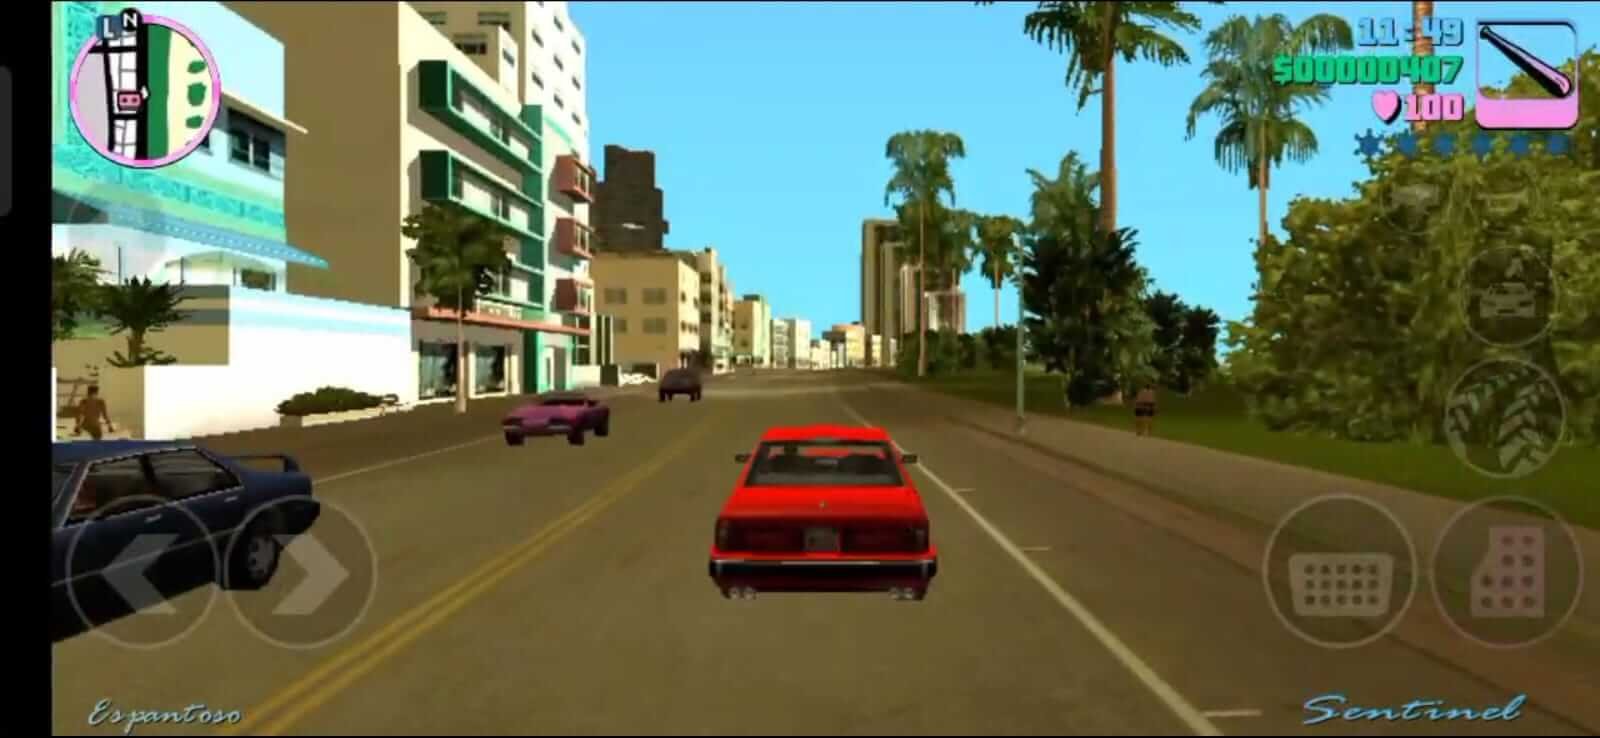 GTA VICE CITY DOWNLOAD ANDROID 2023LATEST VERSIONApk + Data VICE  CITYDOWNLOAD PLAY STORE FREE 